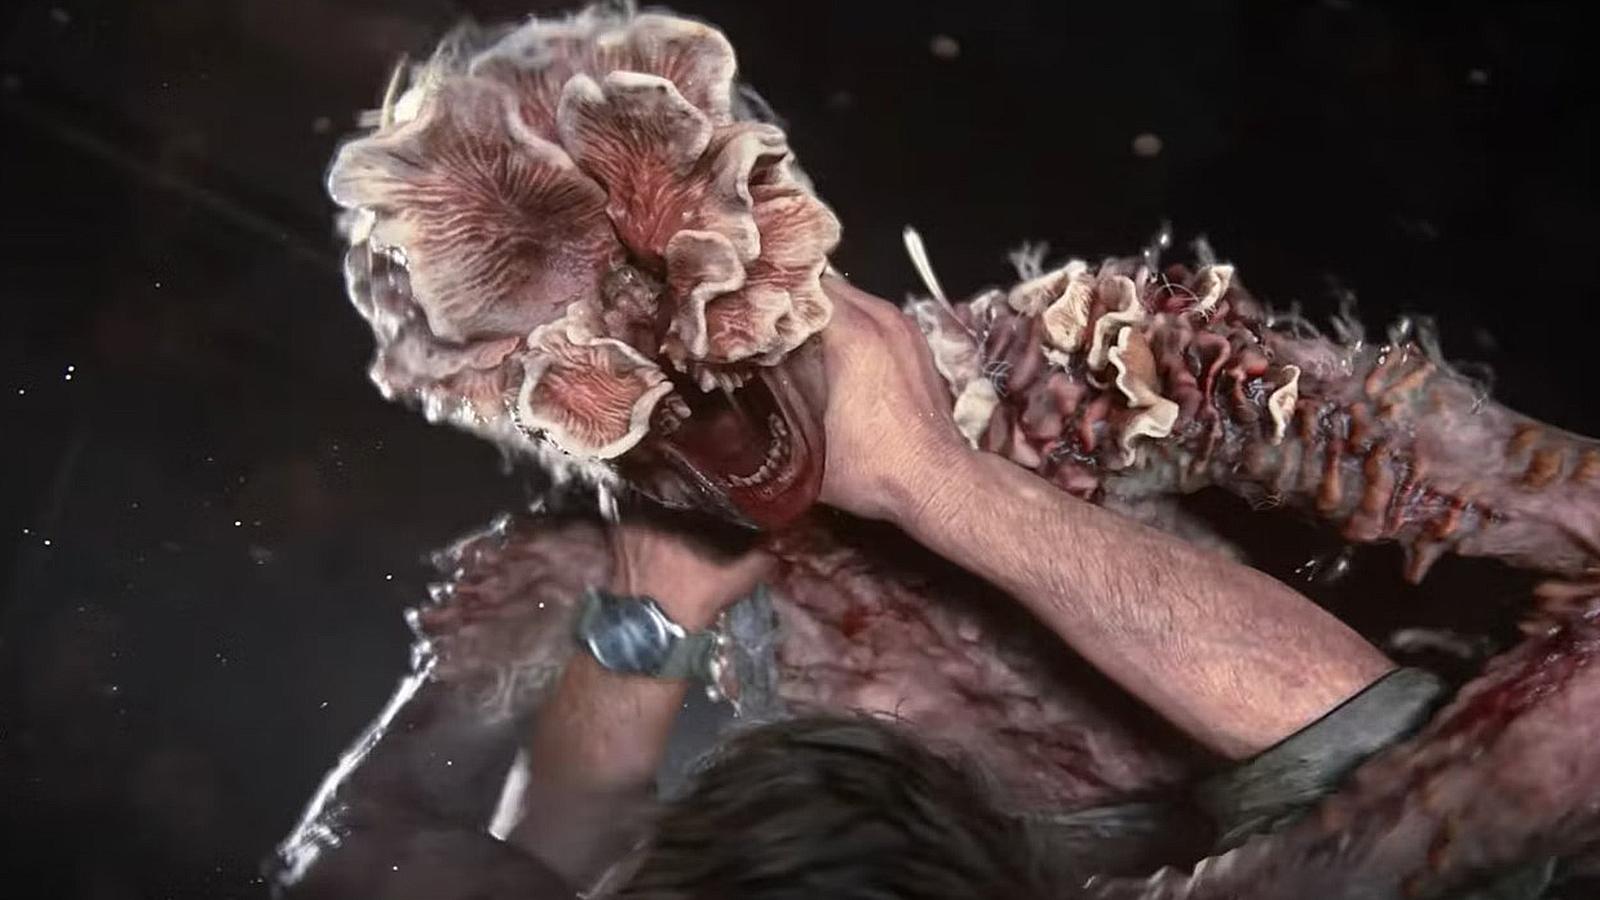 What Are Clickers in 'The Last of Us'? Clicker Origins